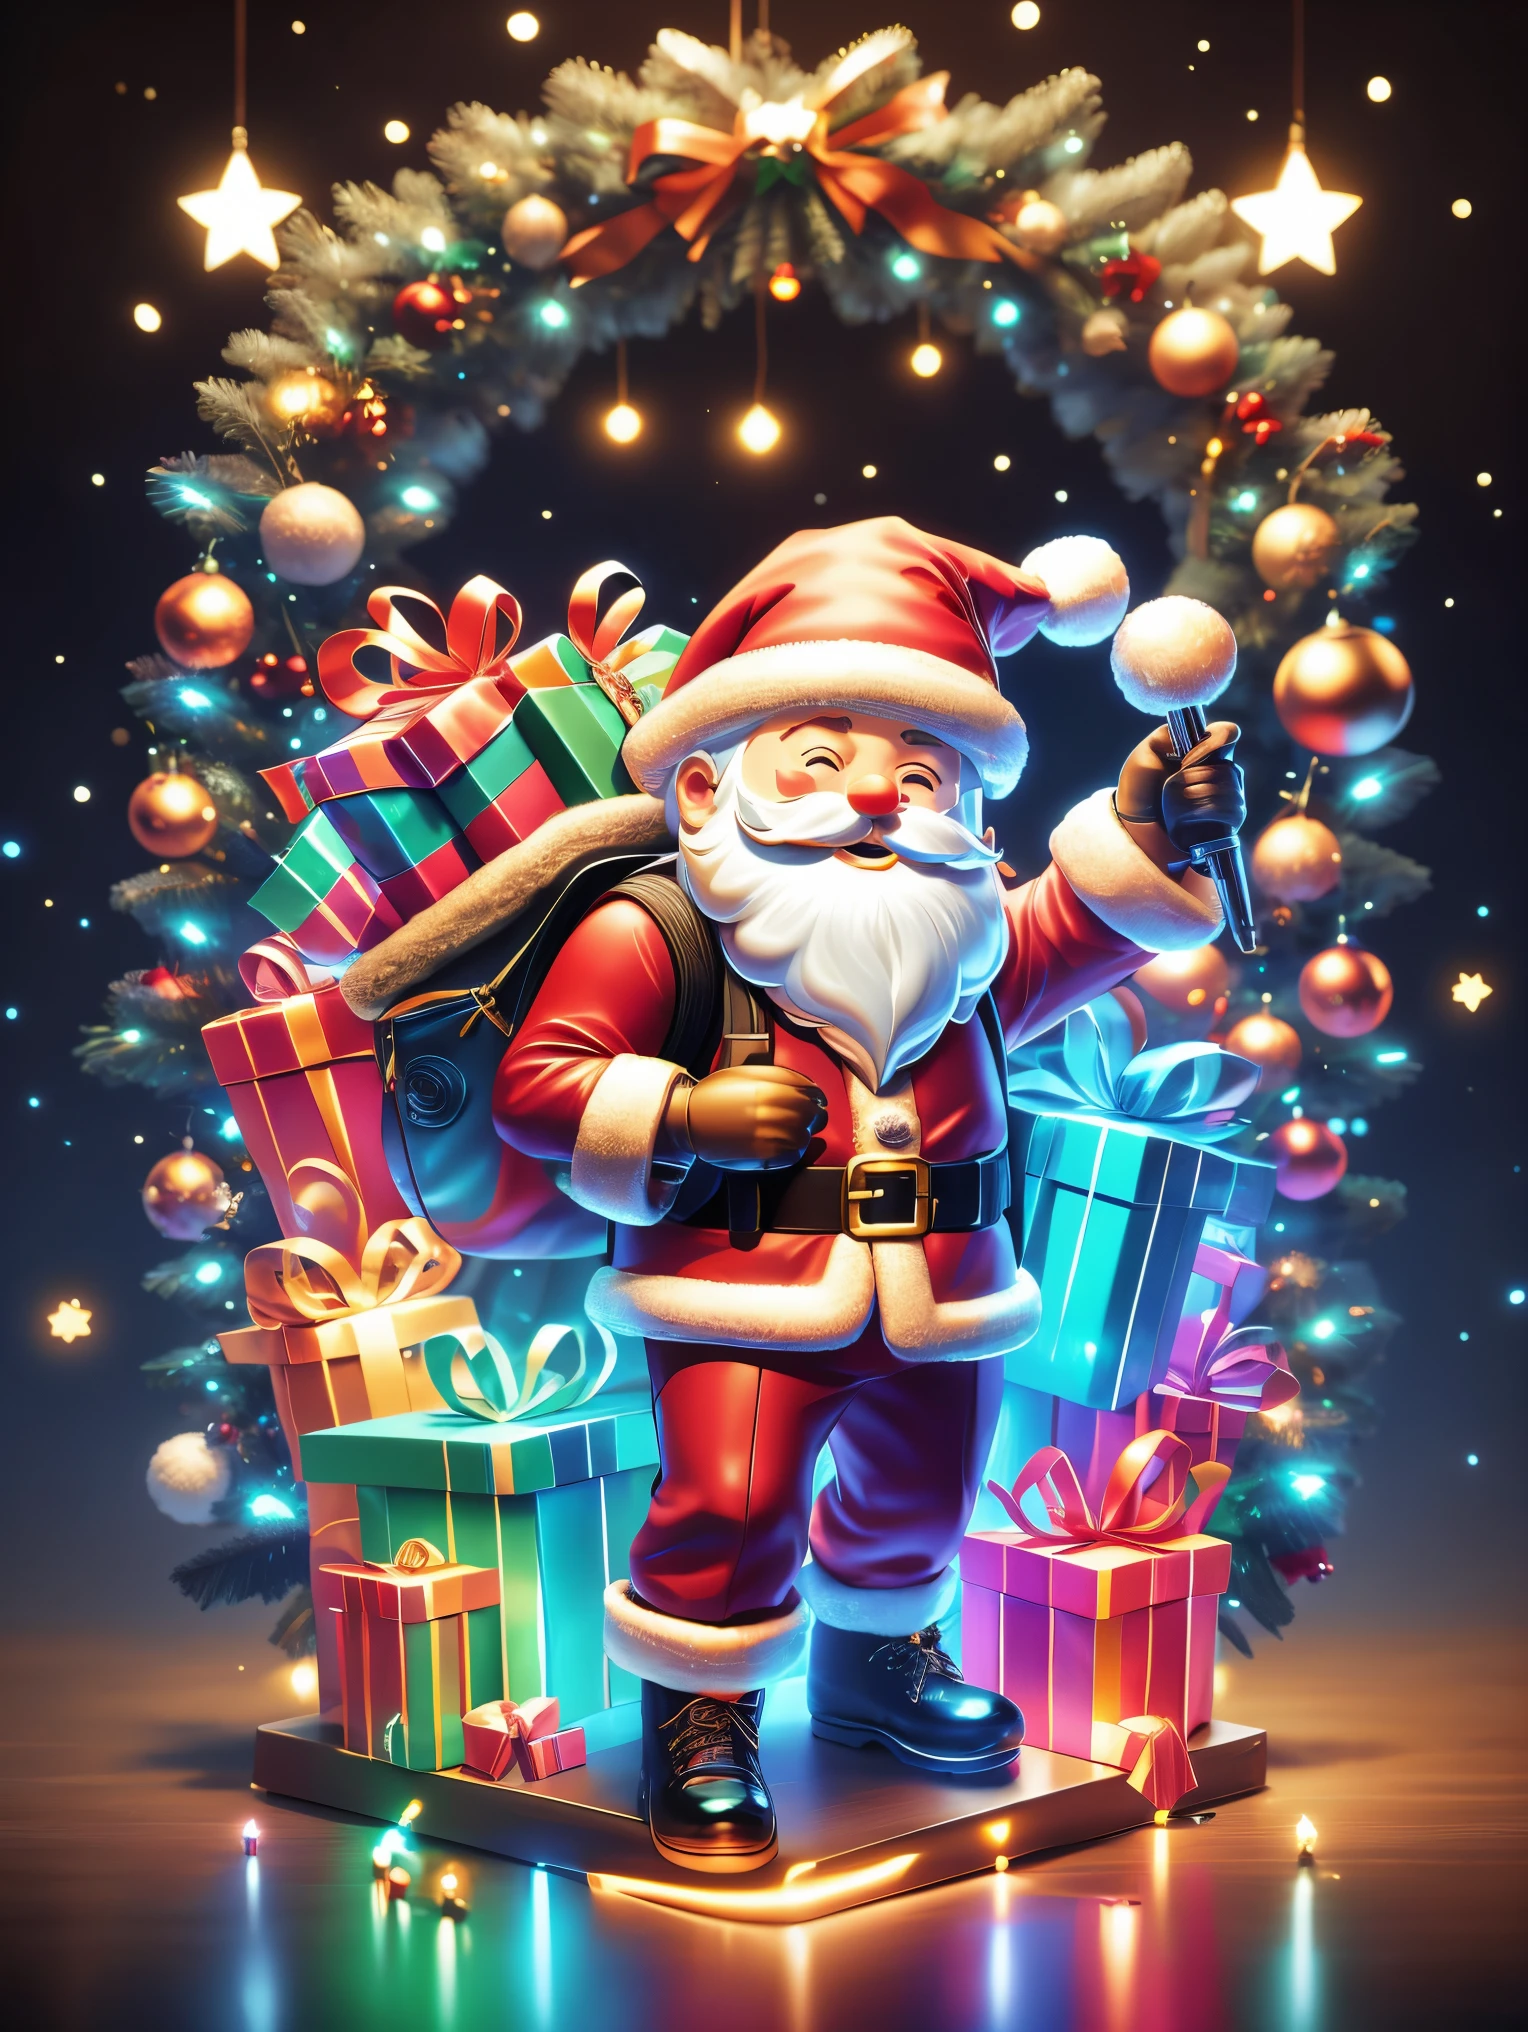 1 transparent glowing mechanical Santa Claus，(Holding CG game gun iconssw)，Carrying a rucksack，futuristic santa clauechanical Union Christmas City Background，model shoot style, (extremely detaild的 CG unified 8k wallpapers), hyper realisitc, 8K, super detailing, Best quality at best, Award-Awarded, Anatomically correct, 16k, super detailing